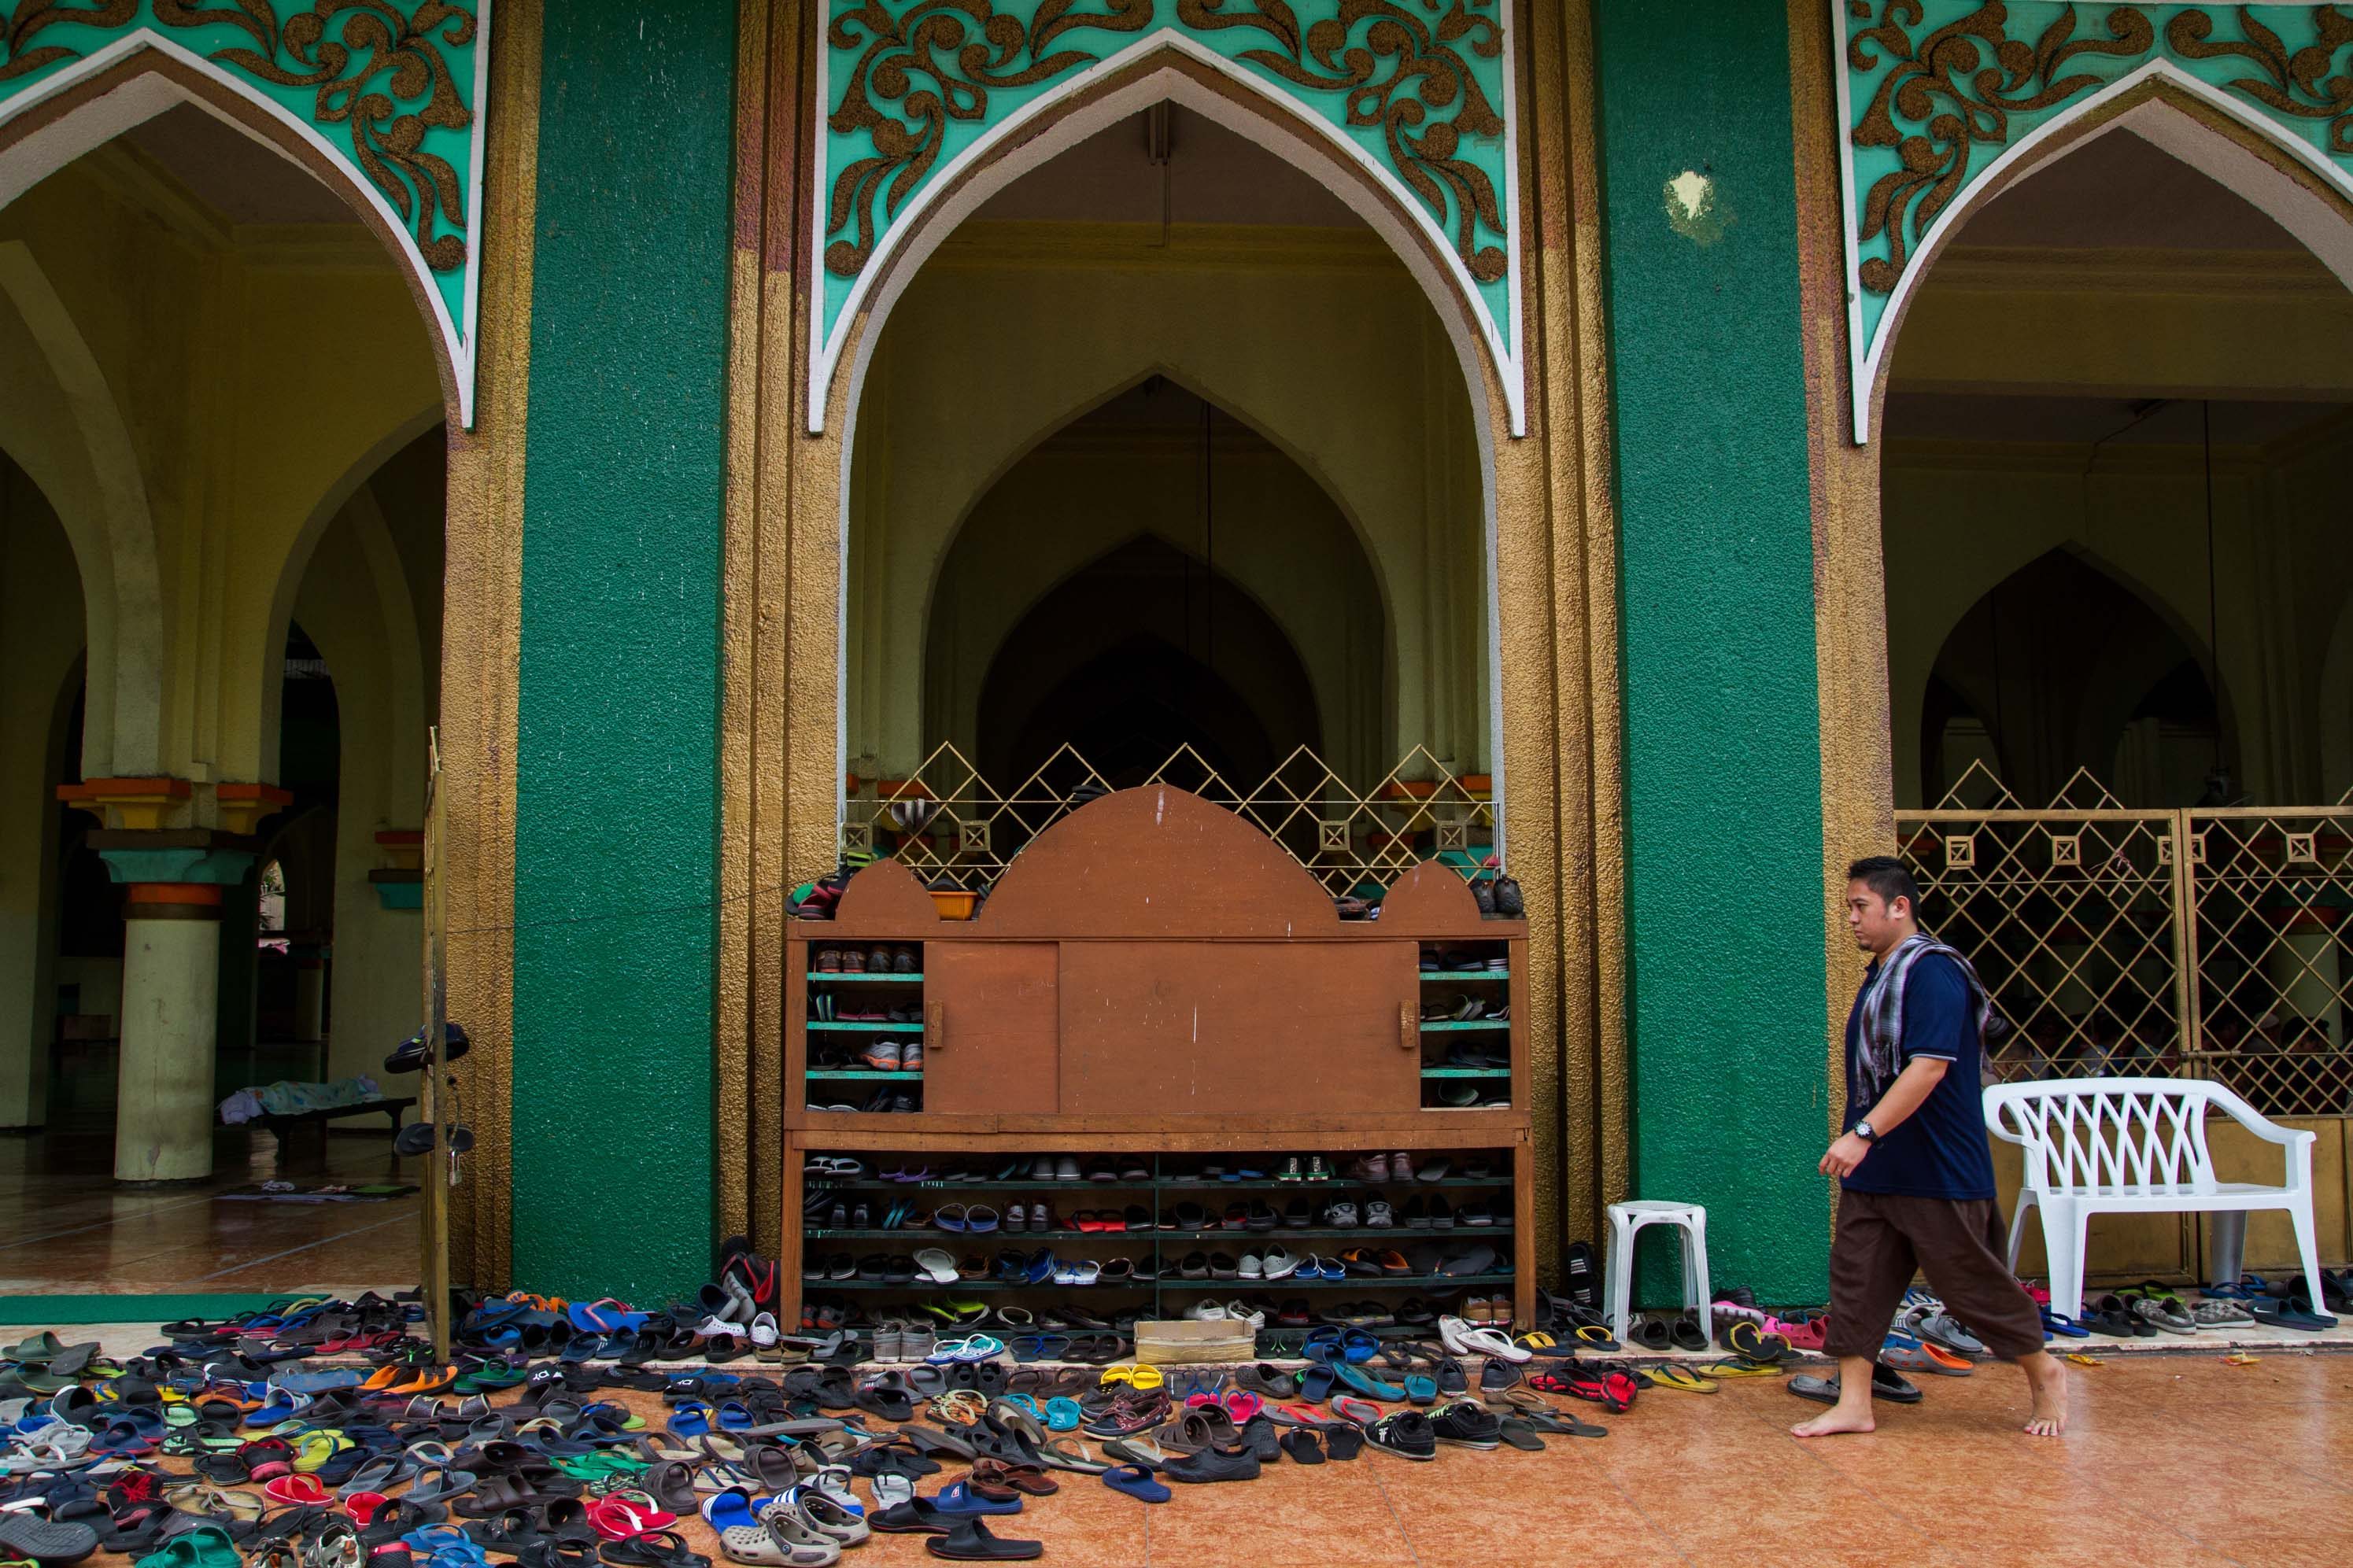 PLACE OF PRAYER. Before entering the mosque or any place of prayer, a Muslim leaves his slippers or shoes outside. There are places of worship where they wash their feet first before entering the premises.  